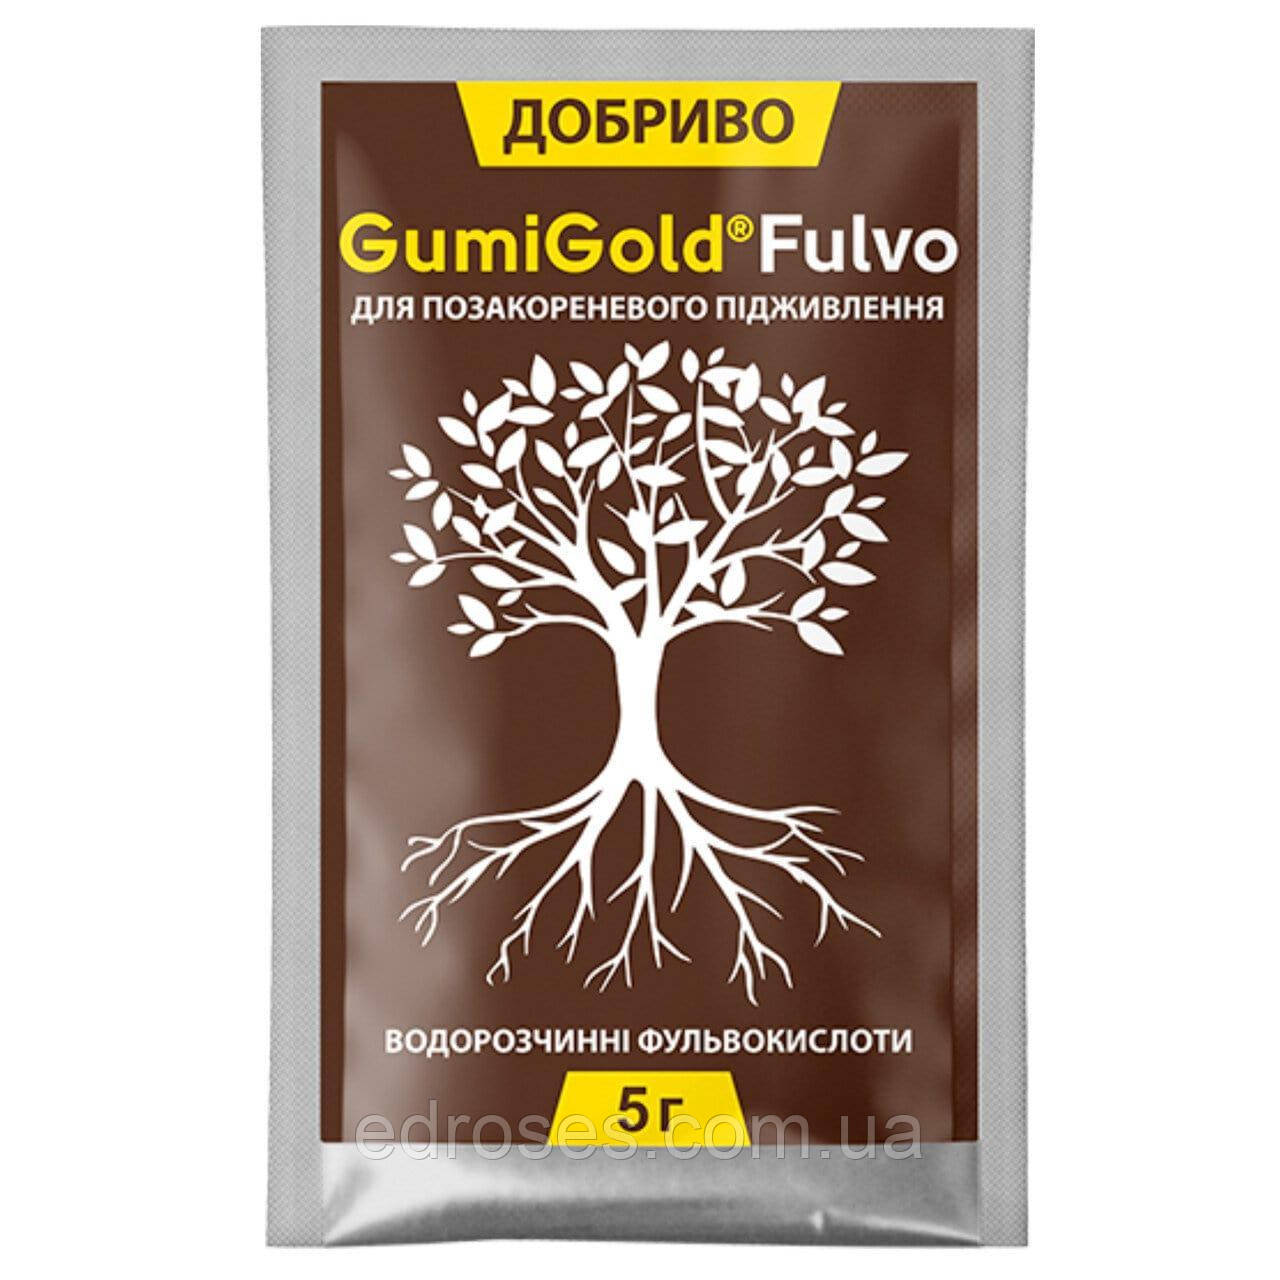 GumiGold® Fulvo - 5 г